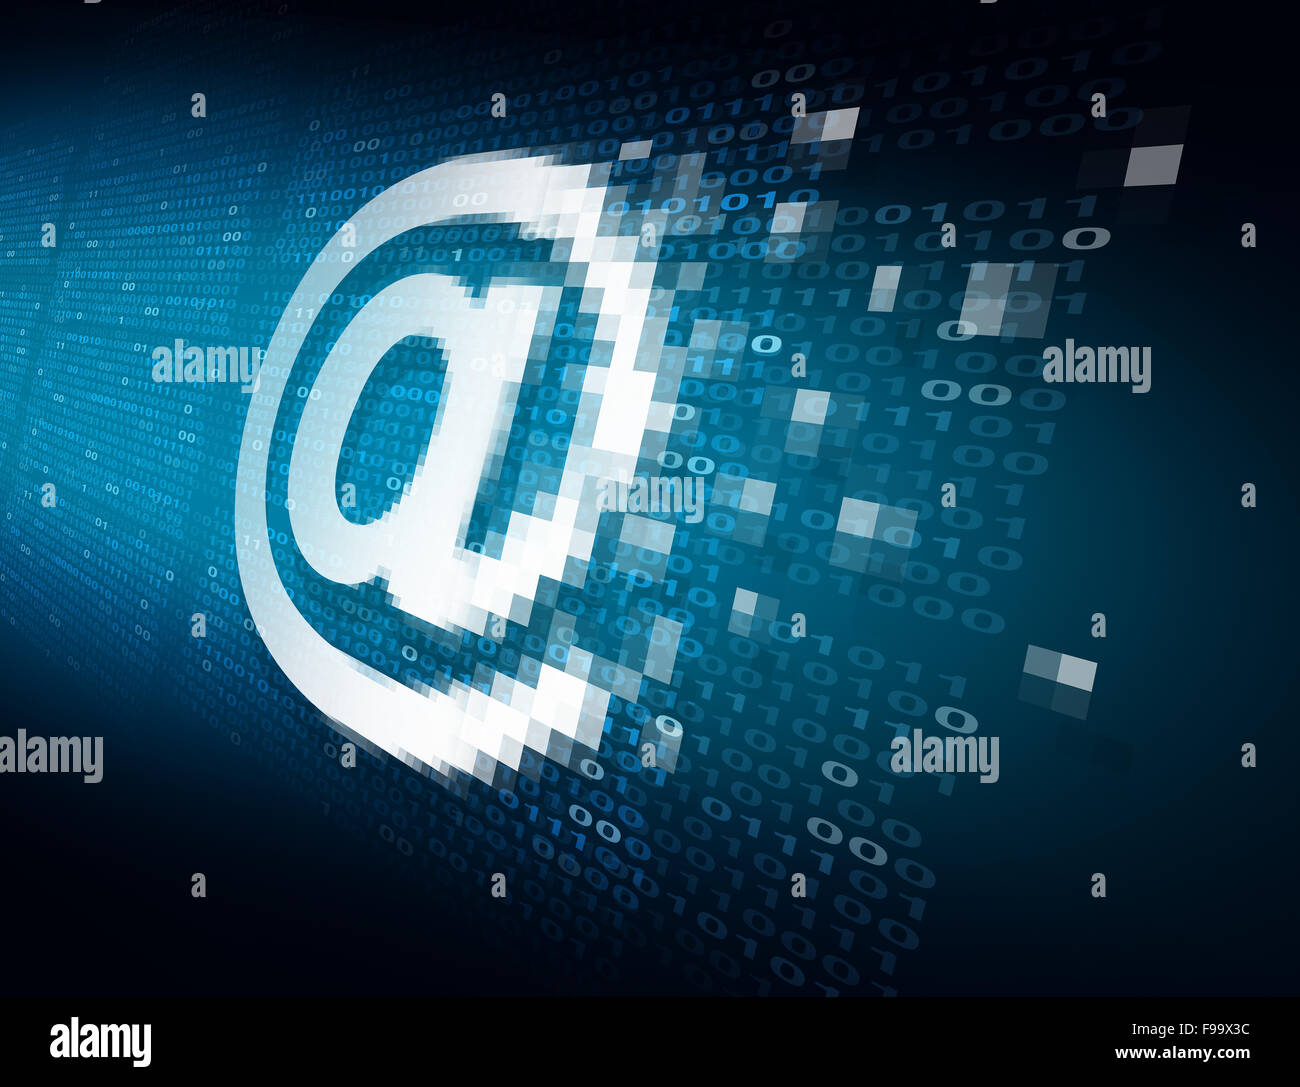 Email internet security technology concept as an at sign icon being encrypted for data transfer protection with binary code background as an online safety icon to protect password and username or reading of personal content. Stock Photo